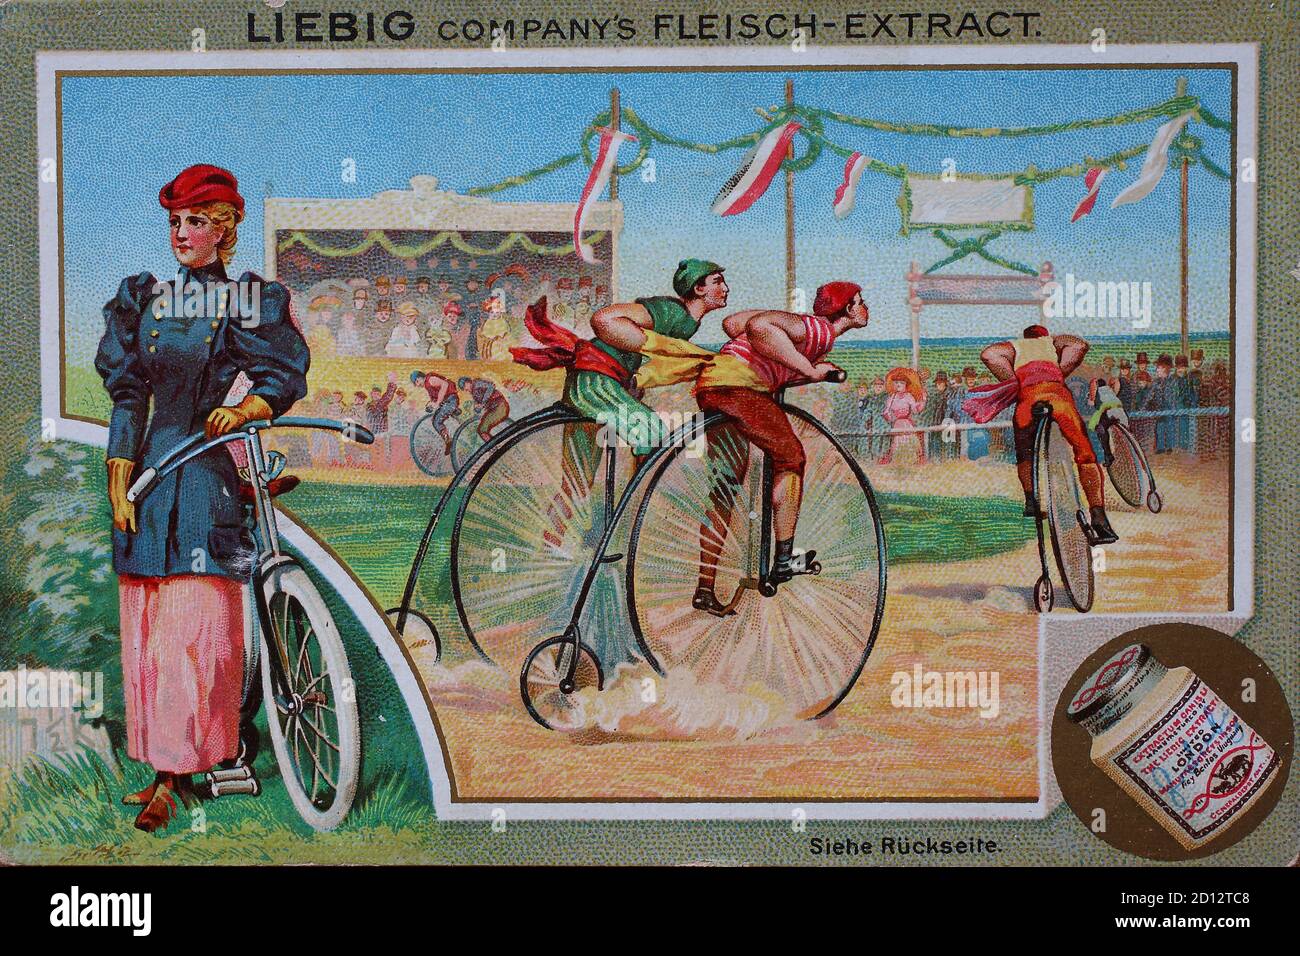 Pictures production sports, cycling, penny farthing, high cycling race, competition  /  Bilderserie Sport, Radfahren, Hochrad, Hochradrennen, Wettbewerb, digital improved reproduction of a collectible image from the Liebig company, estimated from 1900, pd  /  digital verbesserte Reproduktion eines Sammelbildes von ca 1900, gemeinfrei Stock Photo